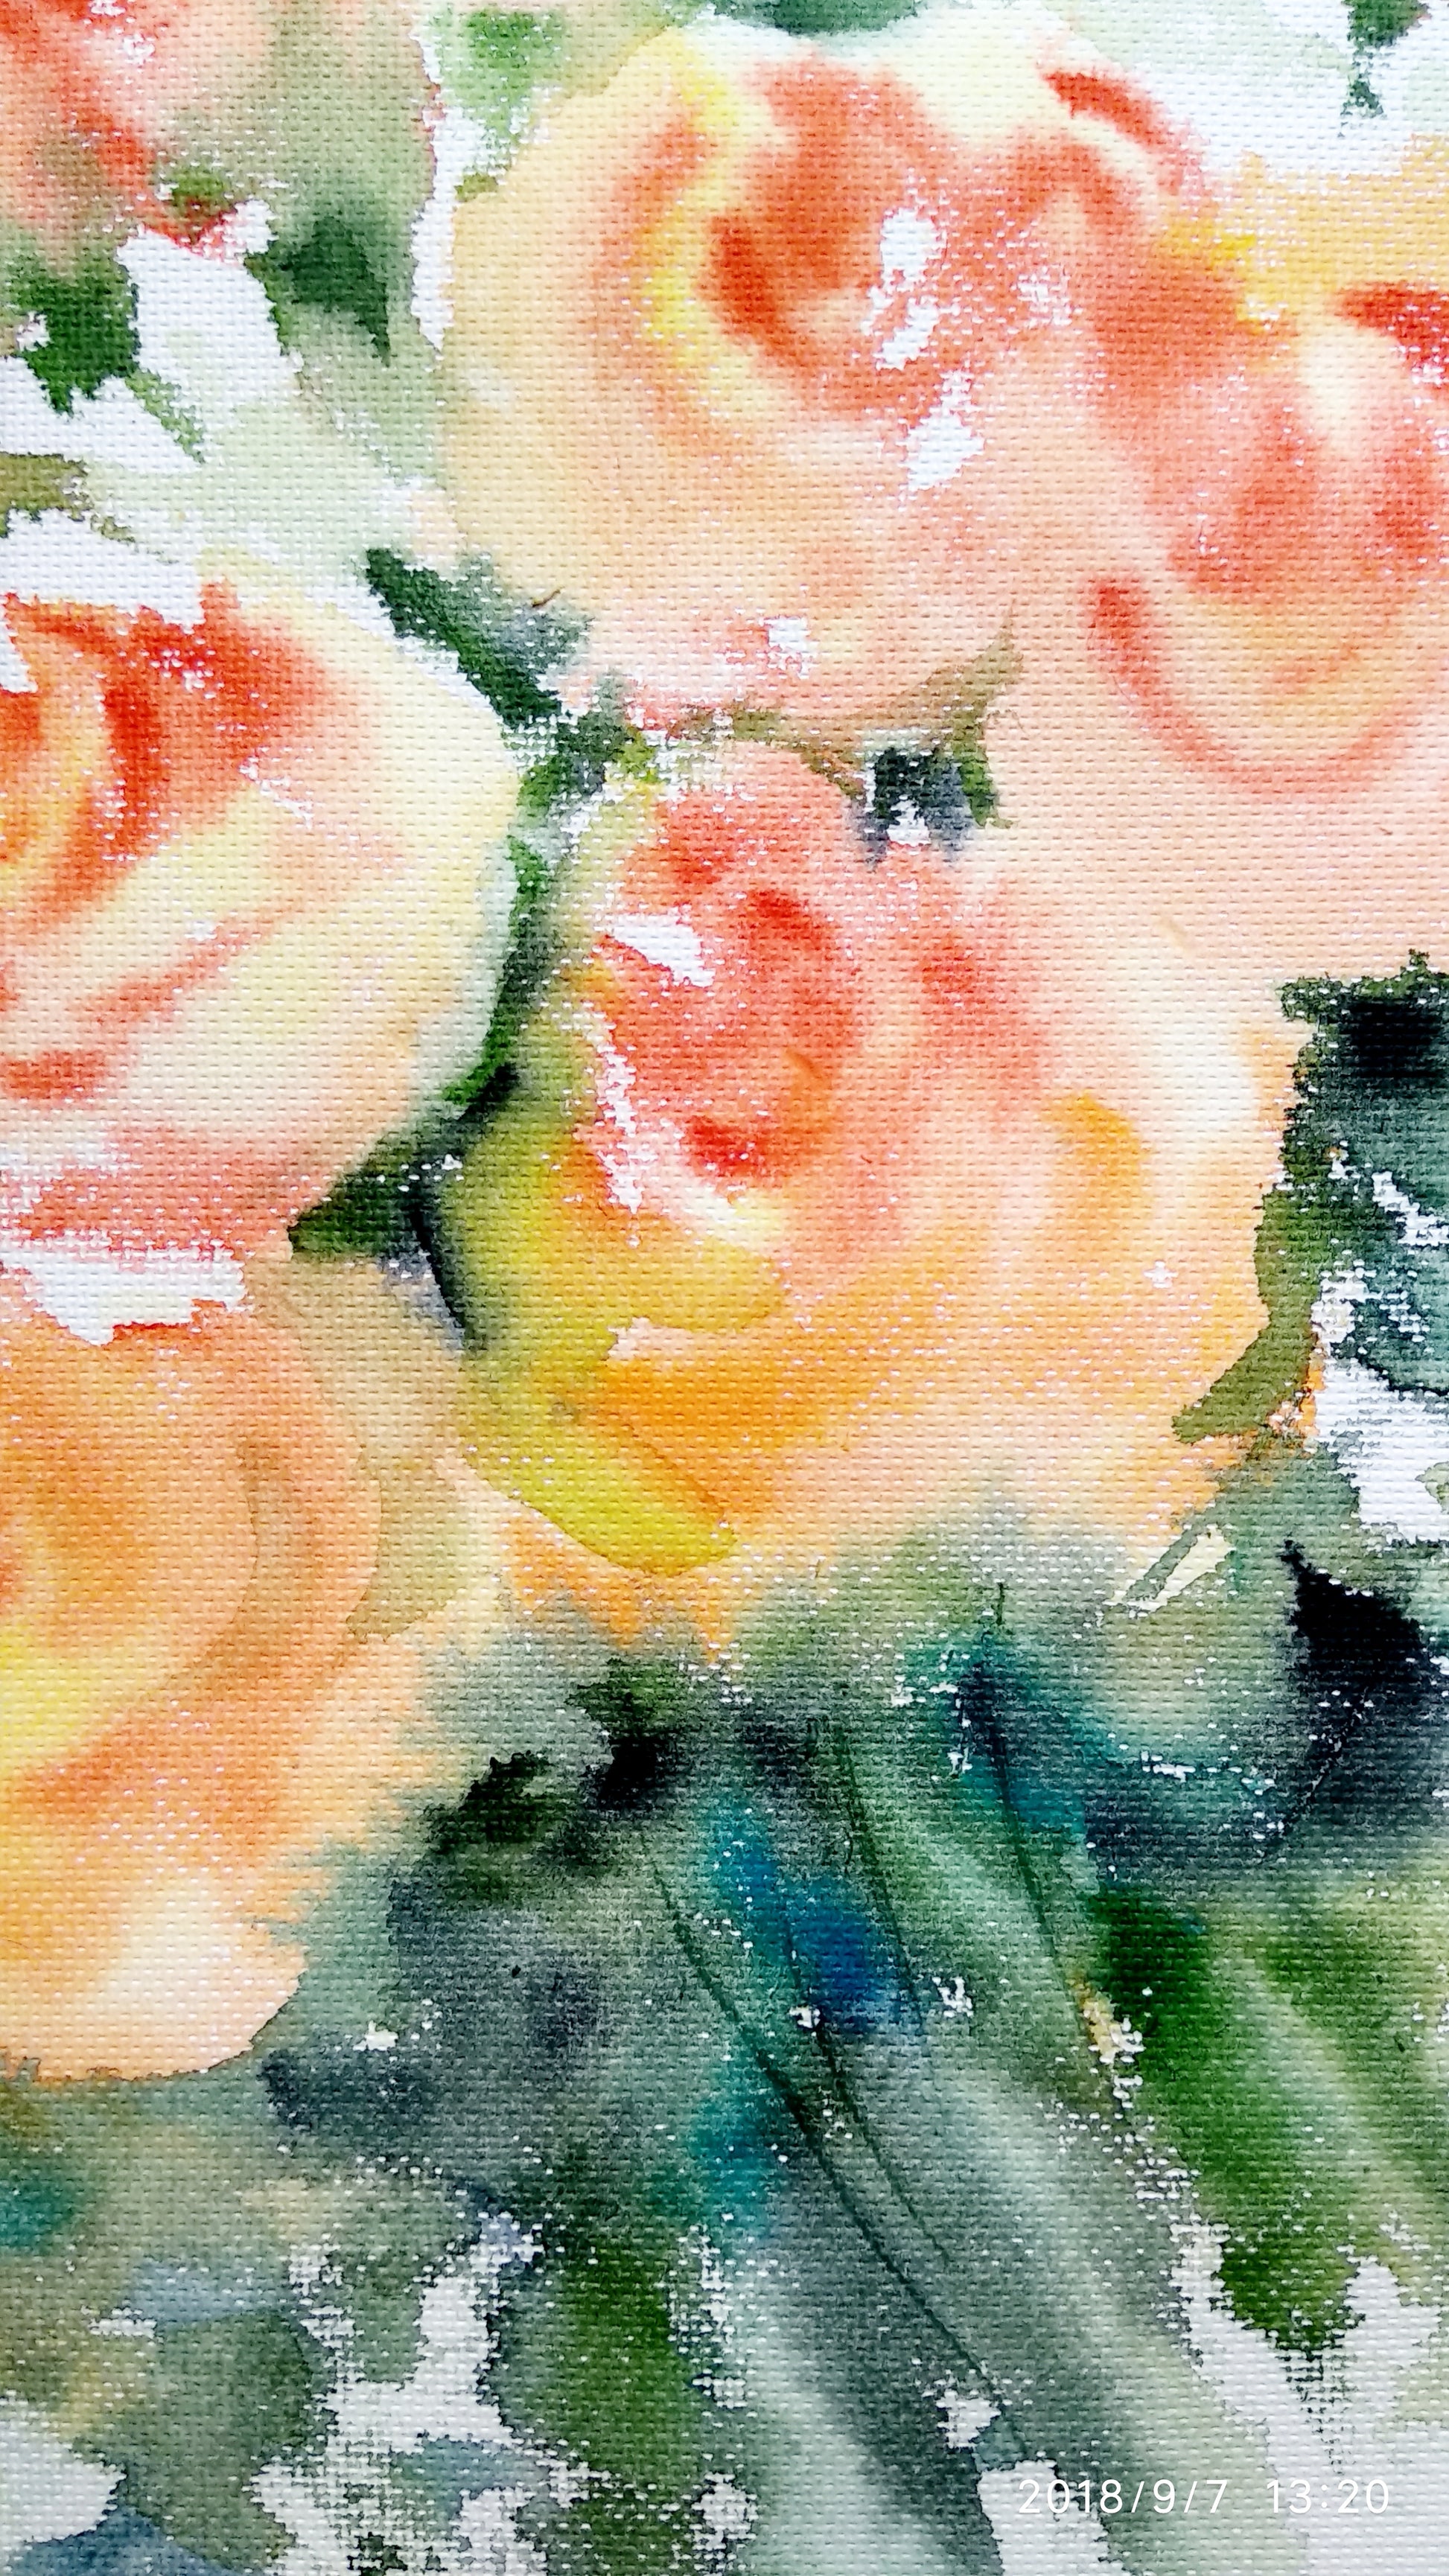 close-up view of Bouquet of cream and orange roses, watercolor painting